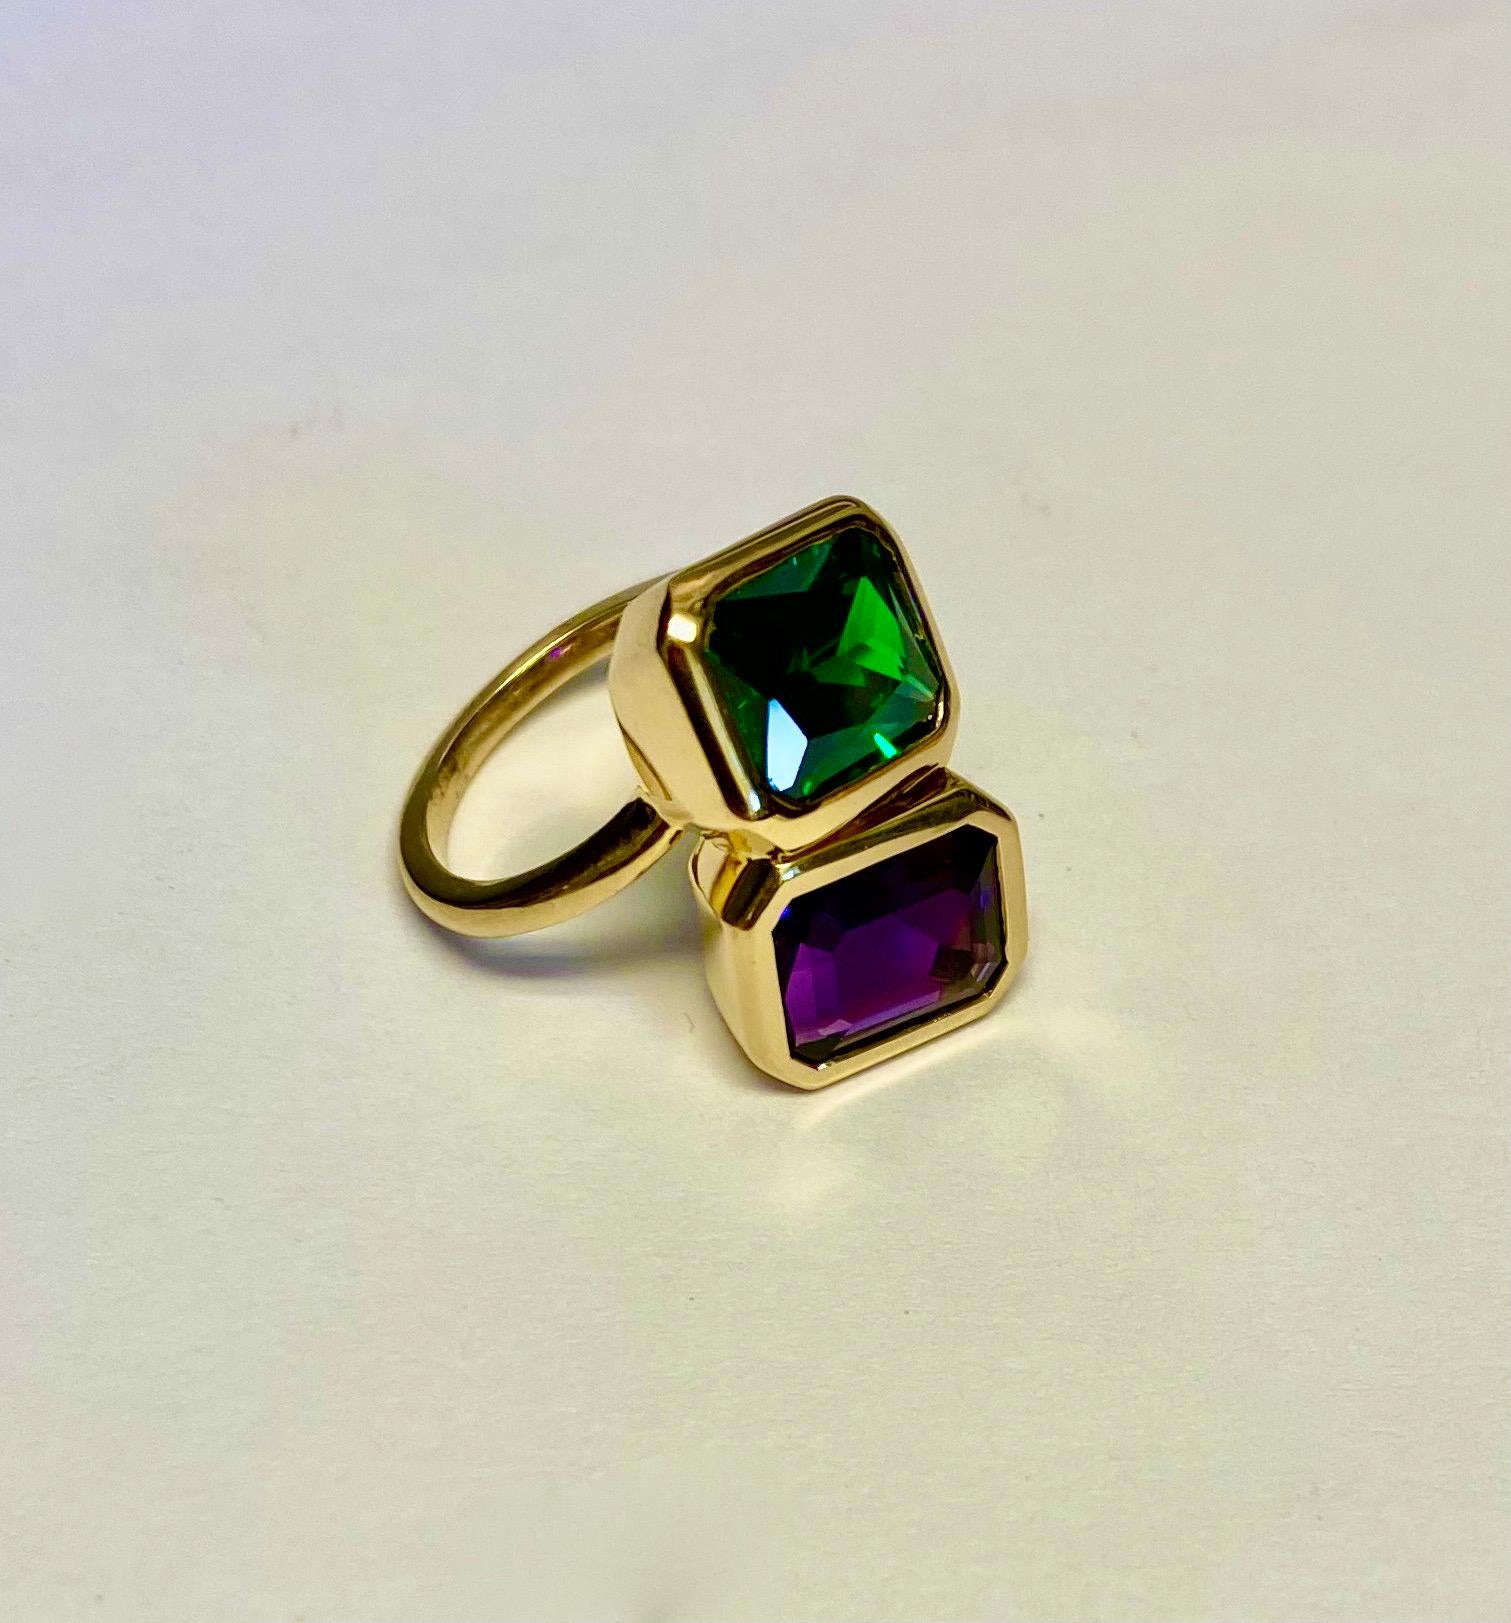 Chrome tourmaline is paired with a gem quality amethyst in this 